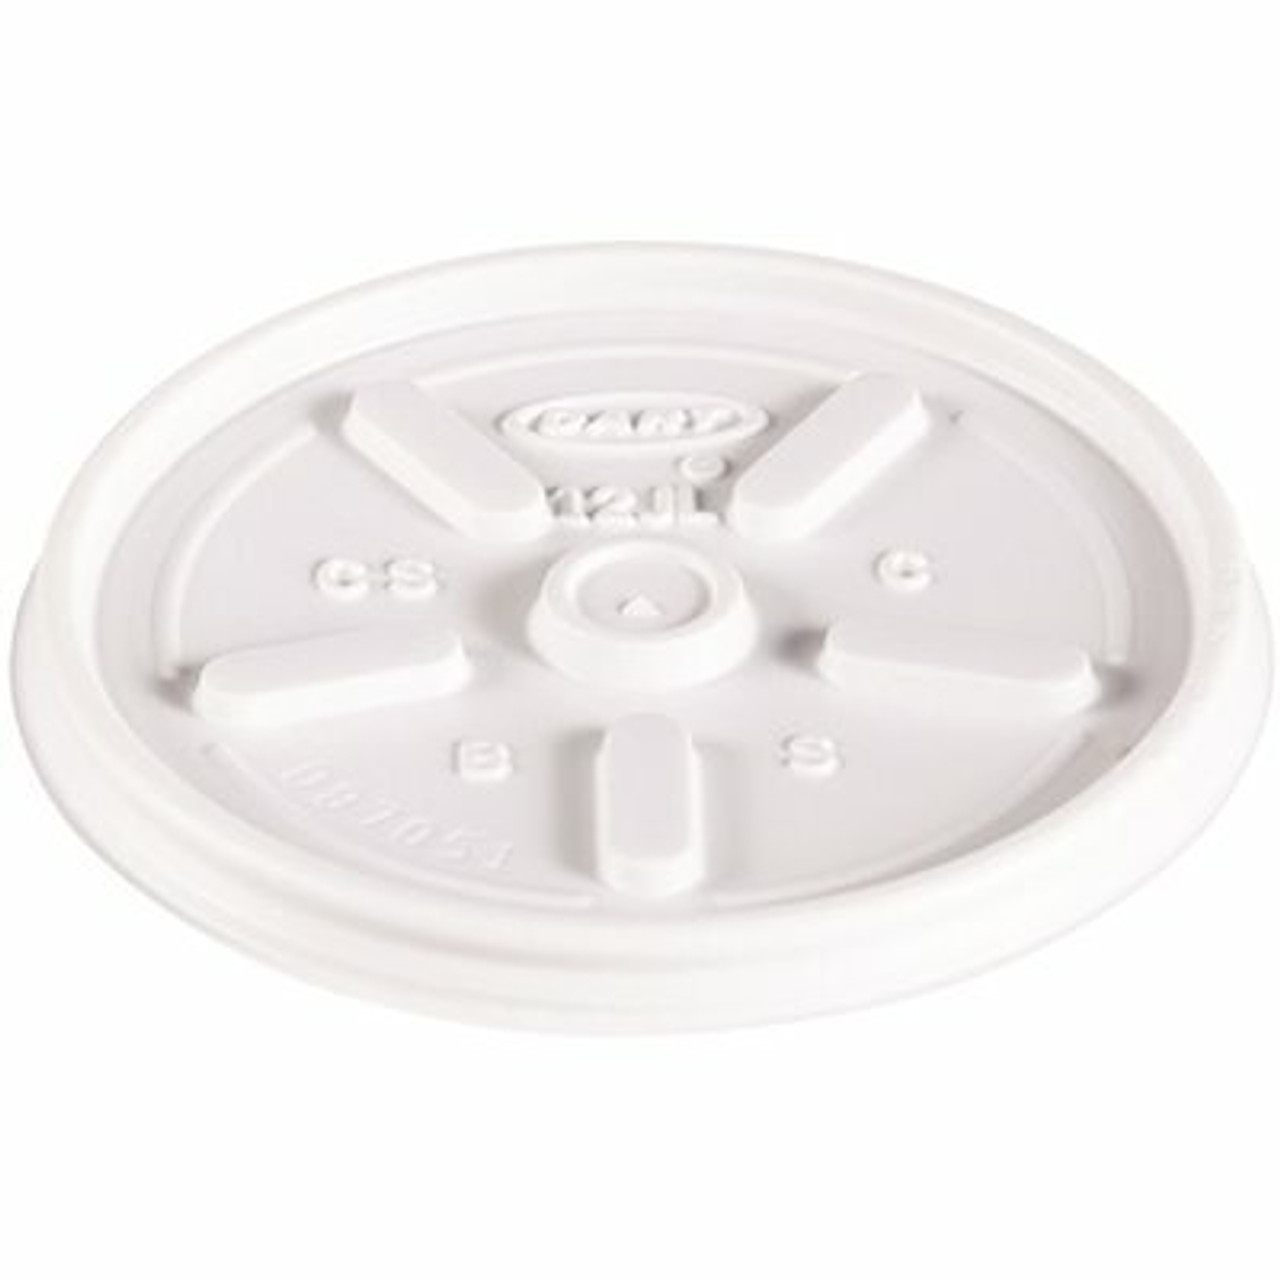 Dart Vented Lid For 12-Series J Style Cups And Containers, White (1000 Per Case)